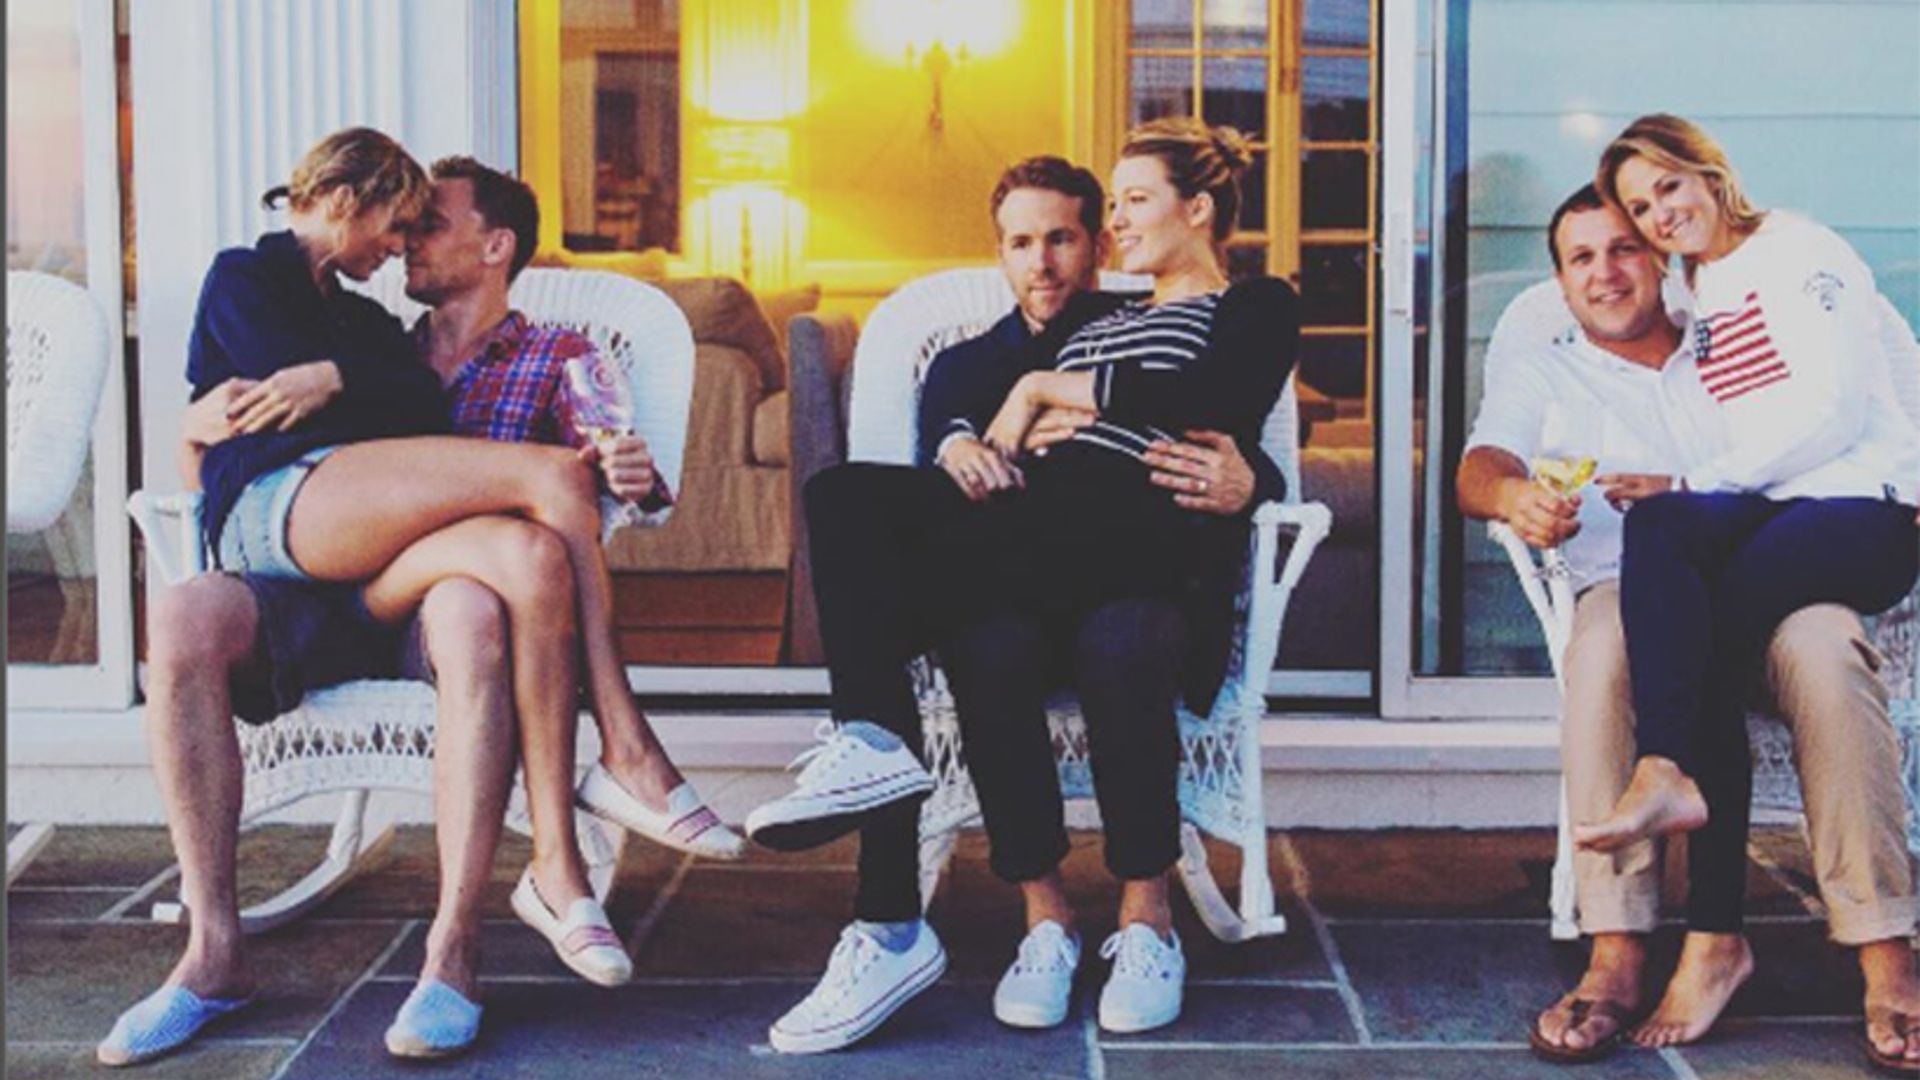 Taylor Swift and Tom Hiddleston cuddle up in intimate new Instagram photo